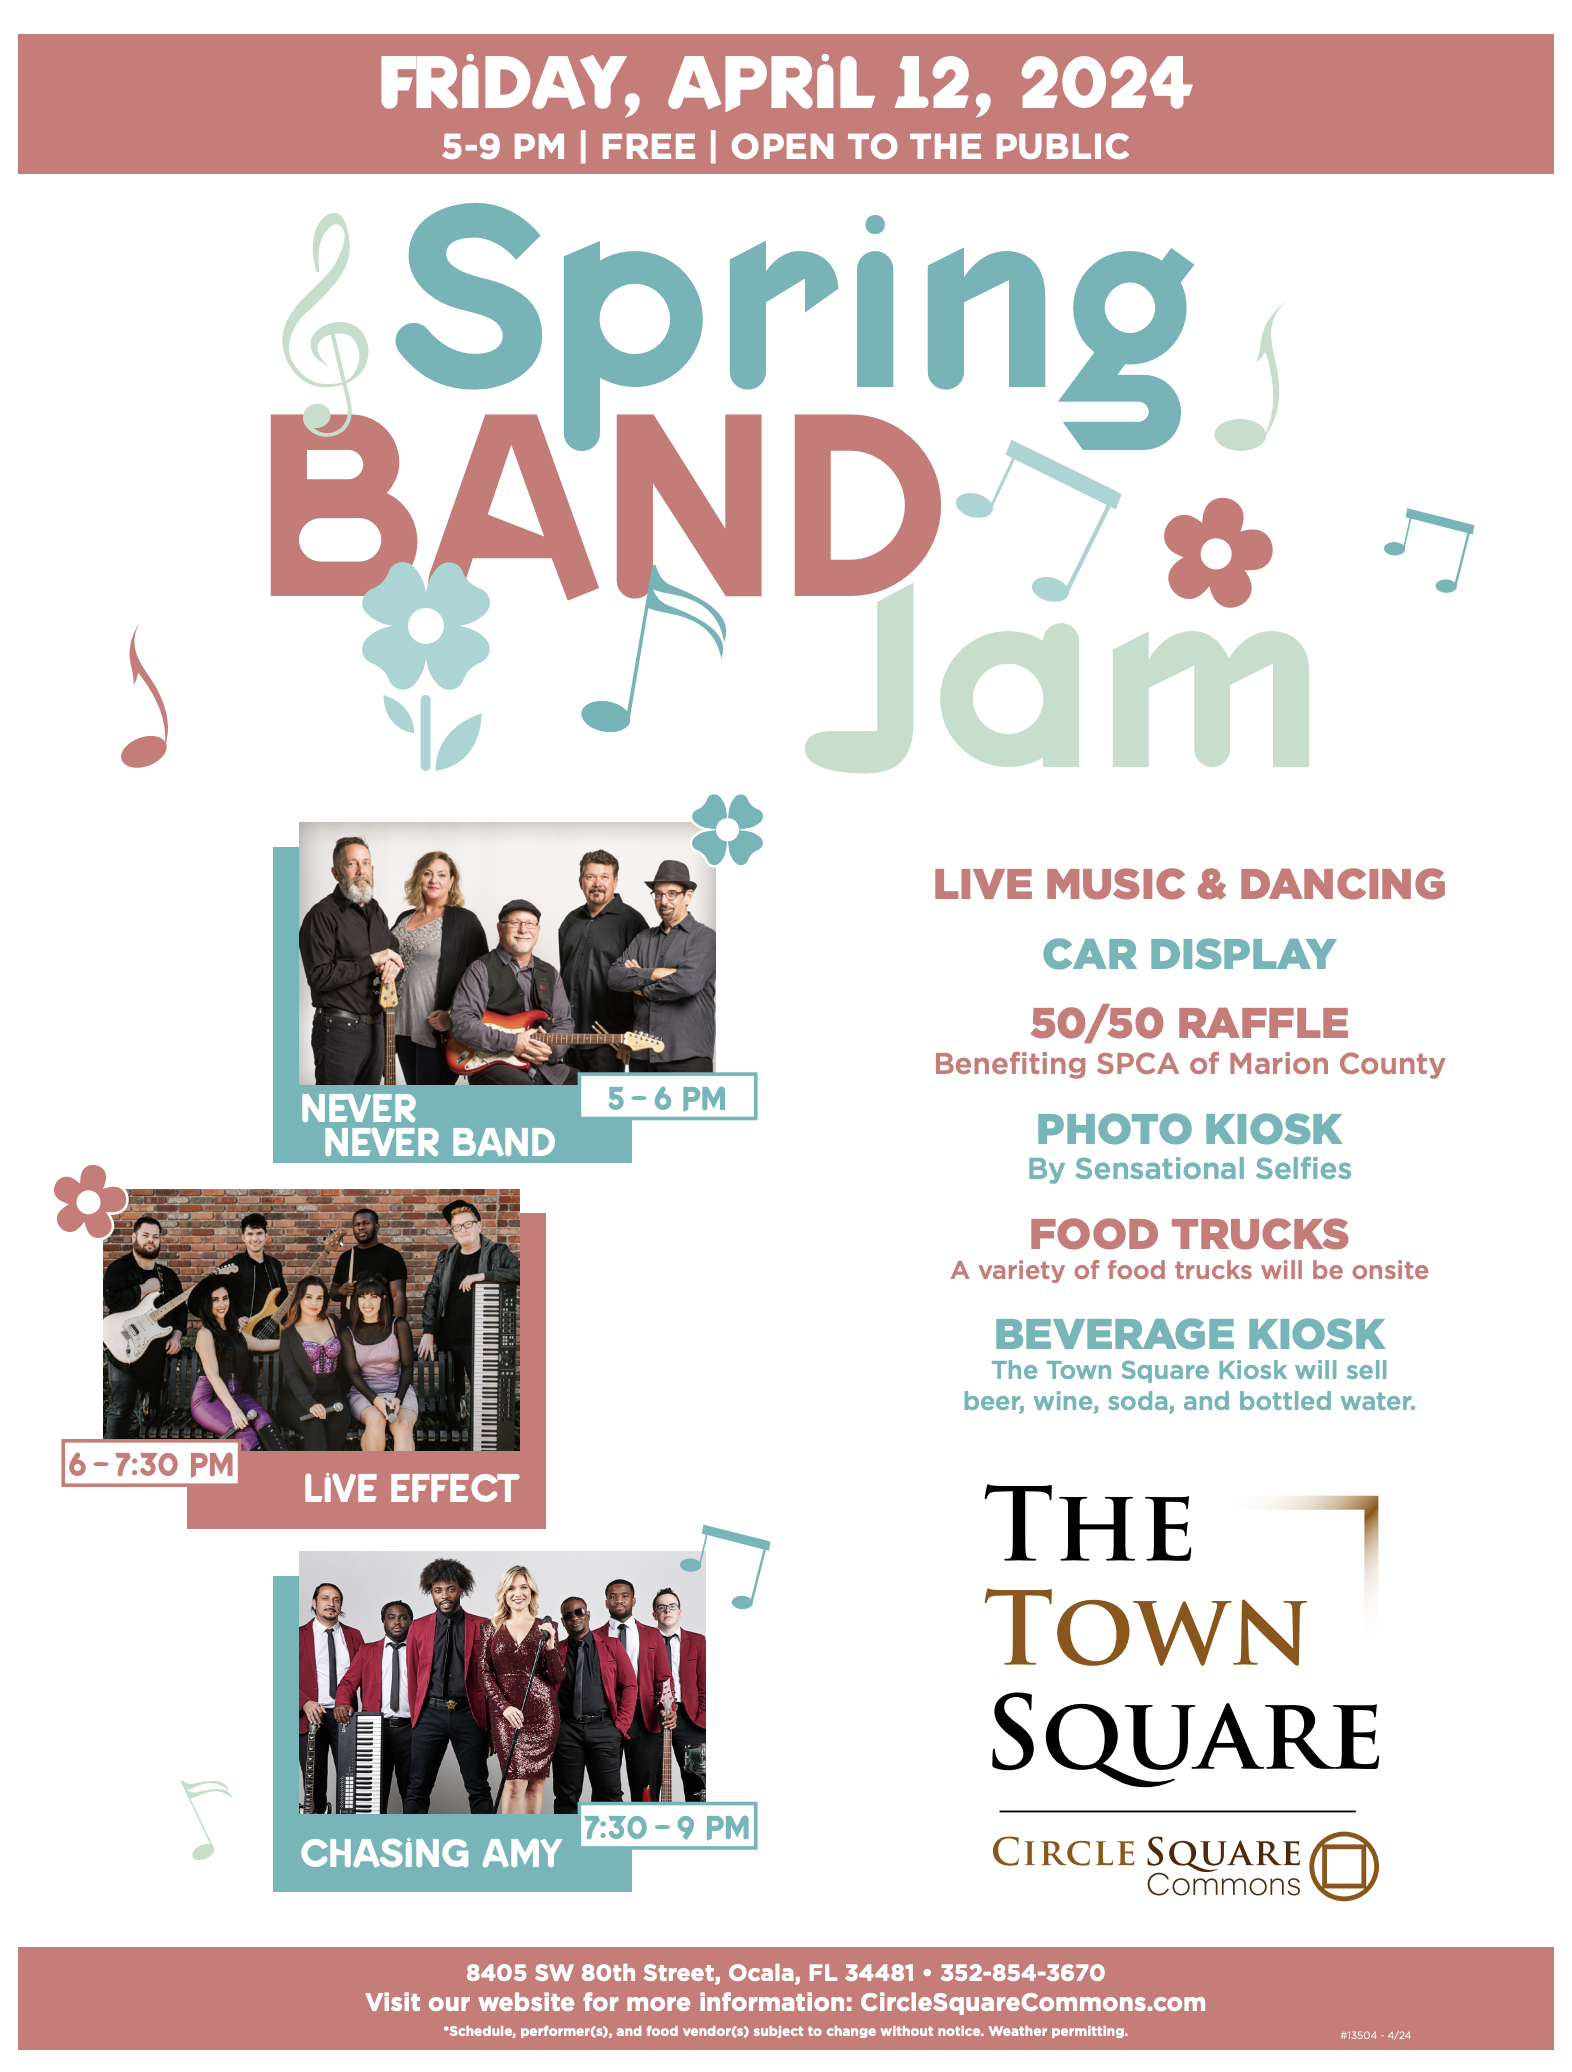 Spring Band Jam at The Town Square